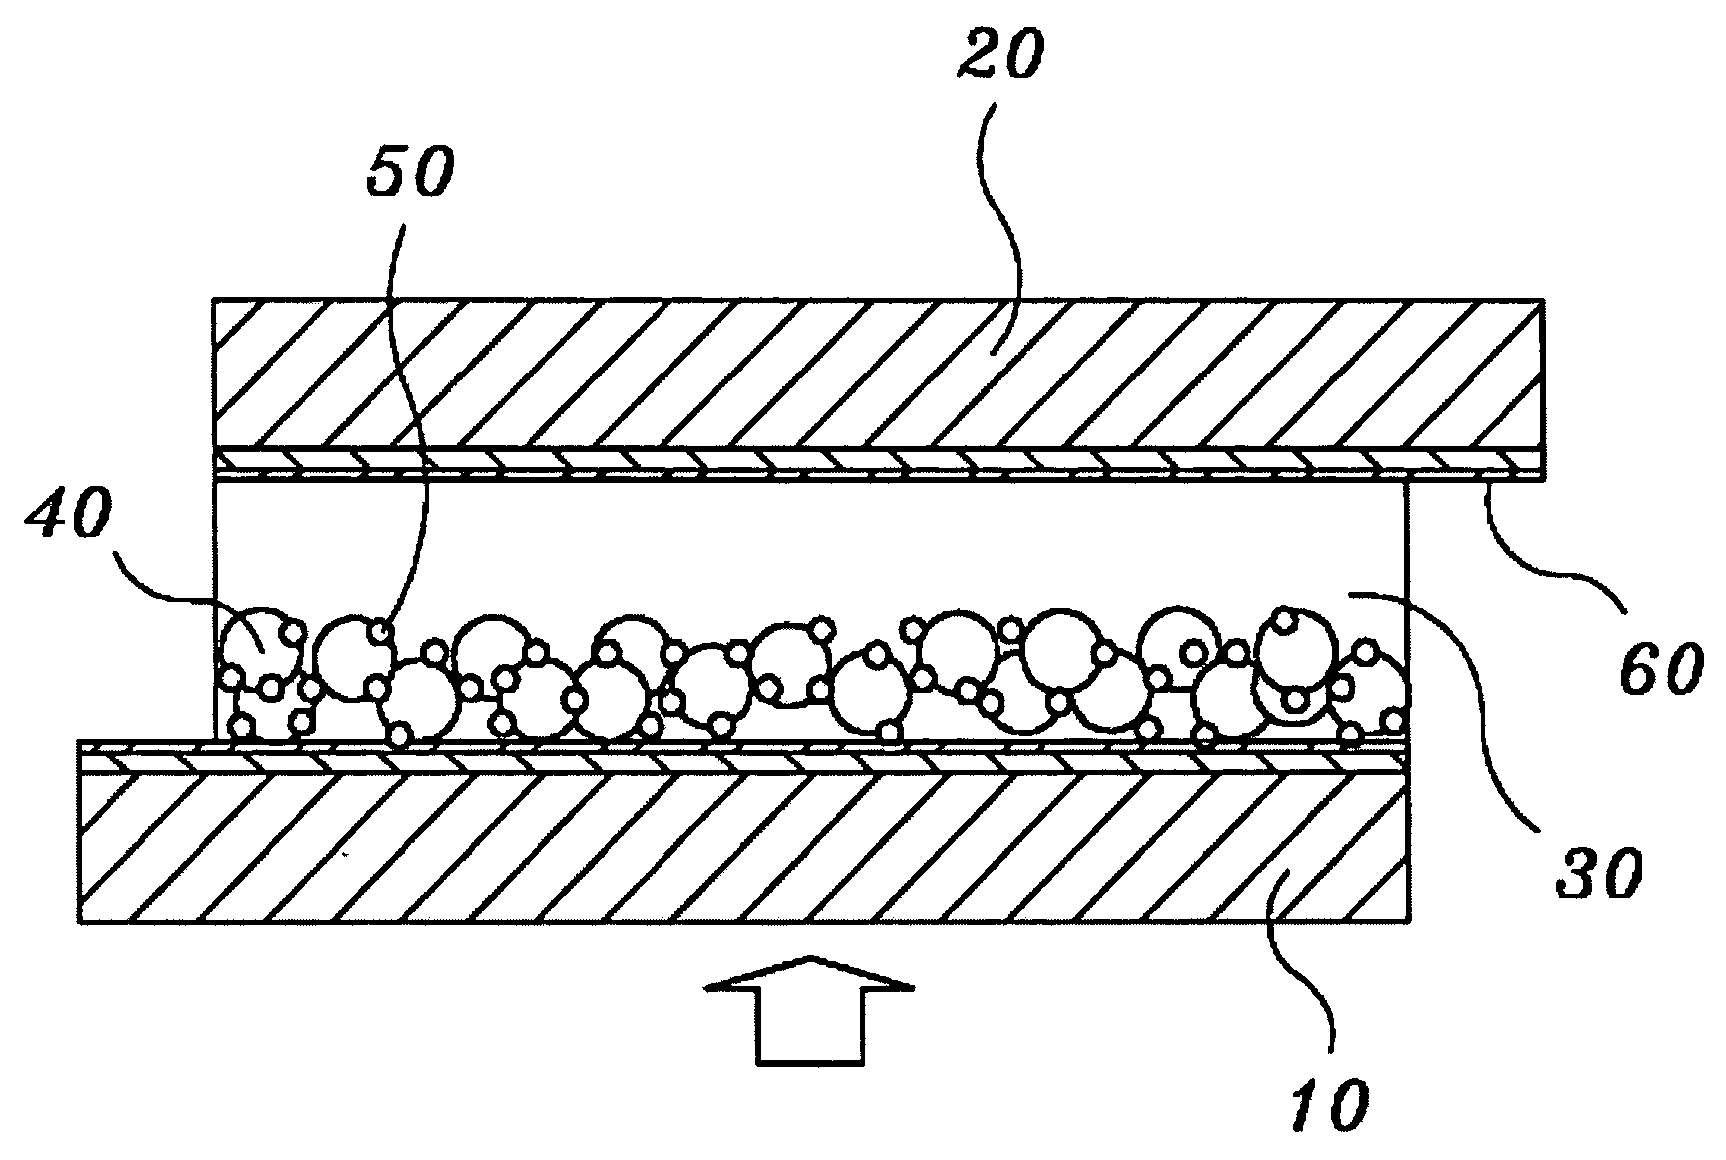 Solid state dye-sensitized solar cell employing composite polymer electrolyte